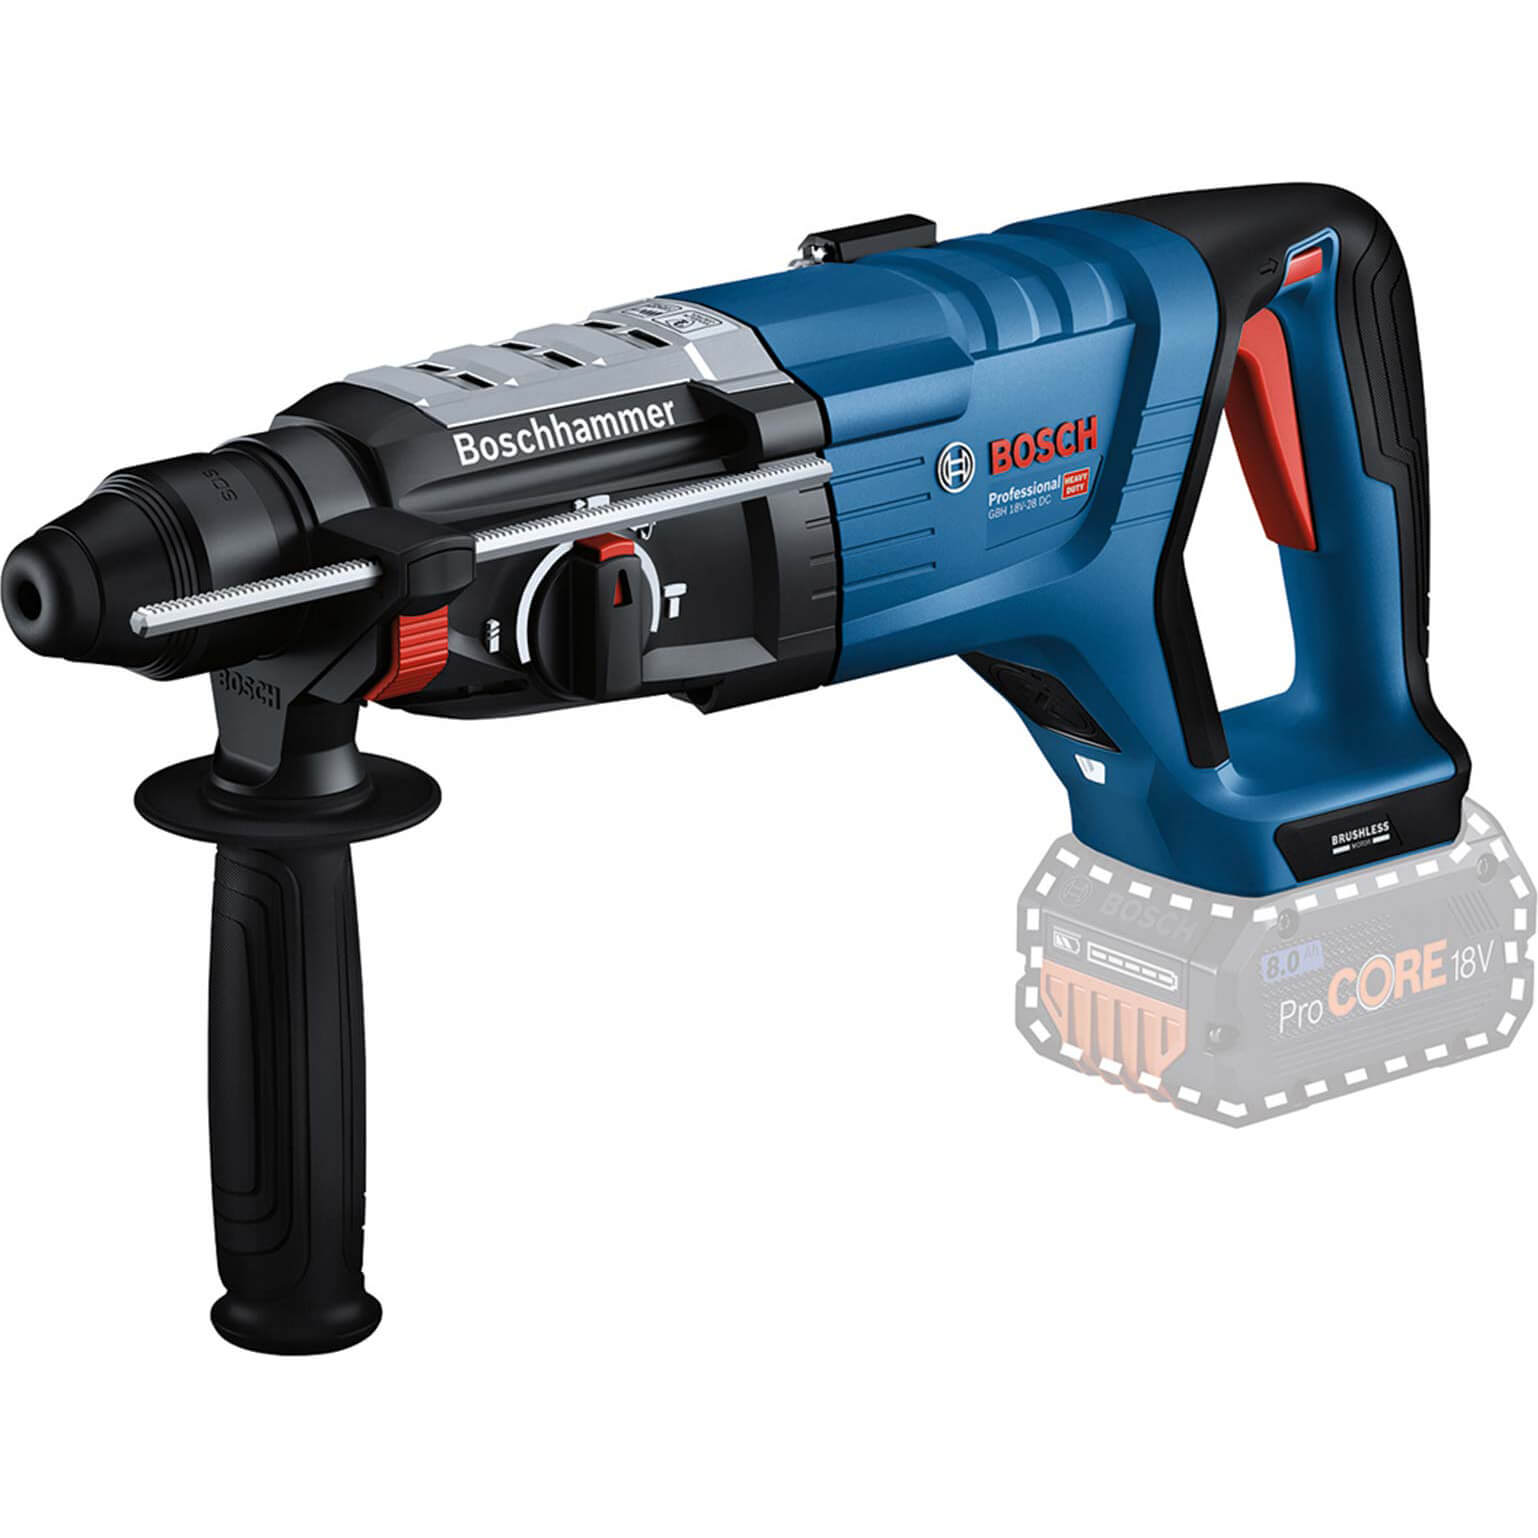 Bosch GBH 18V-28 DC 18v Cordless Brushless SDS Plus Drill No Batteries No Charger No Case